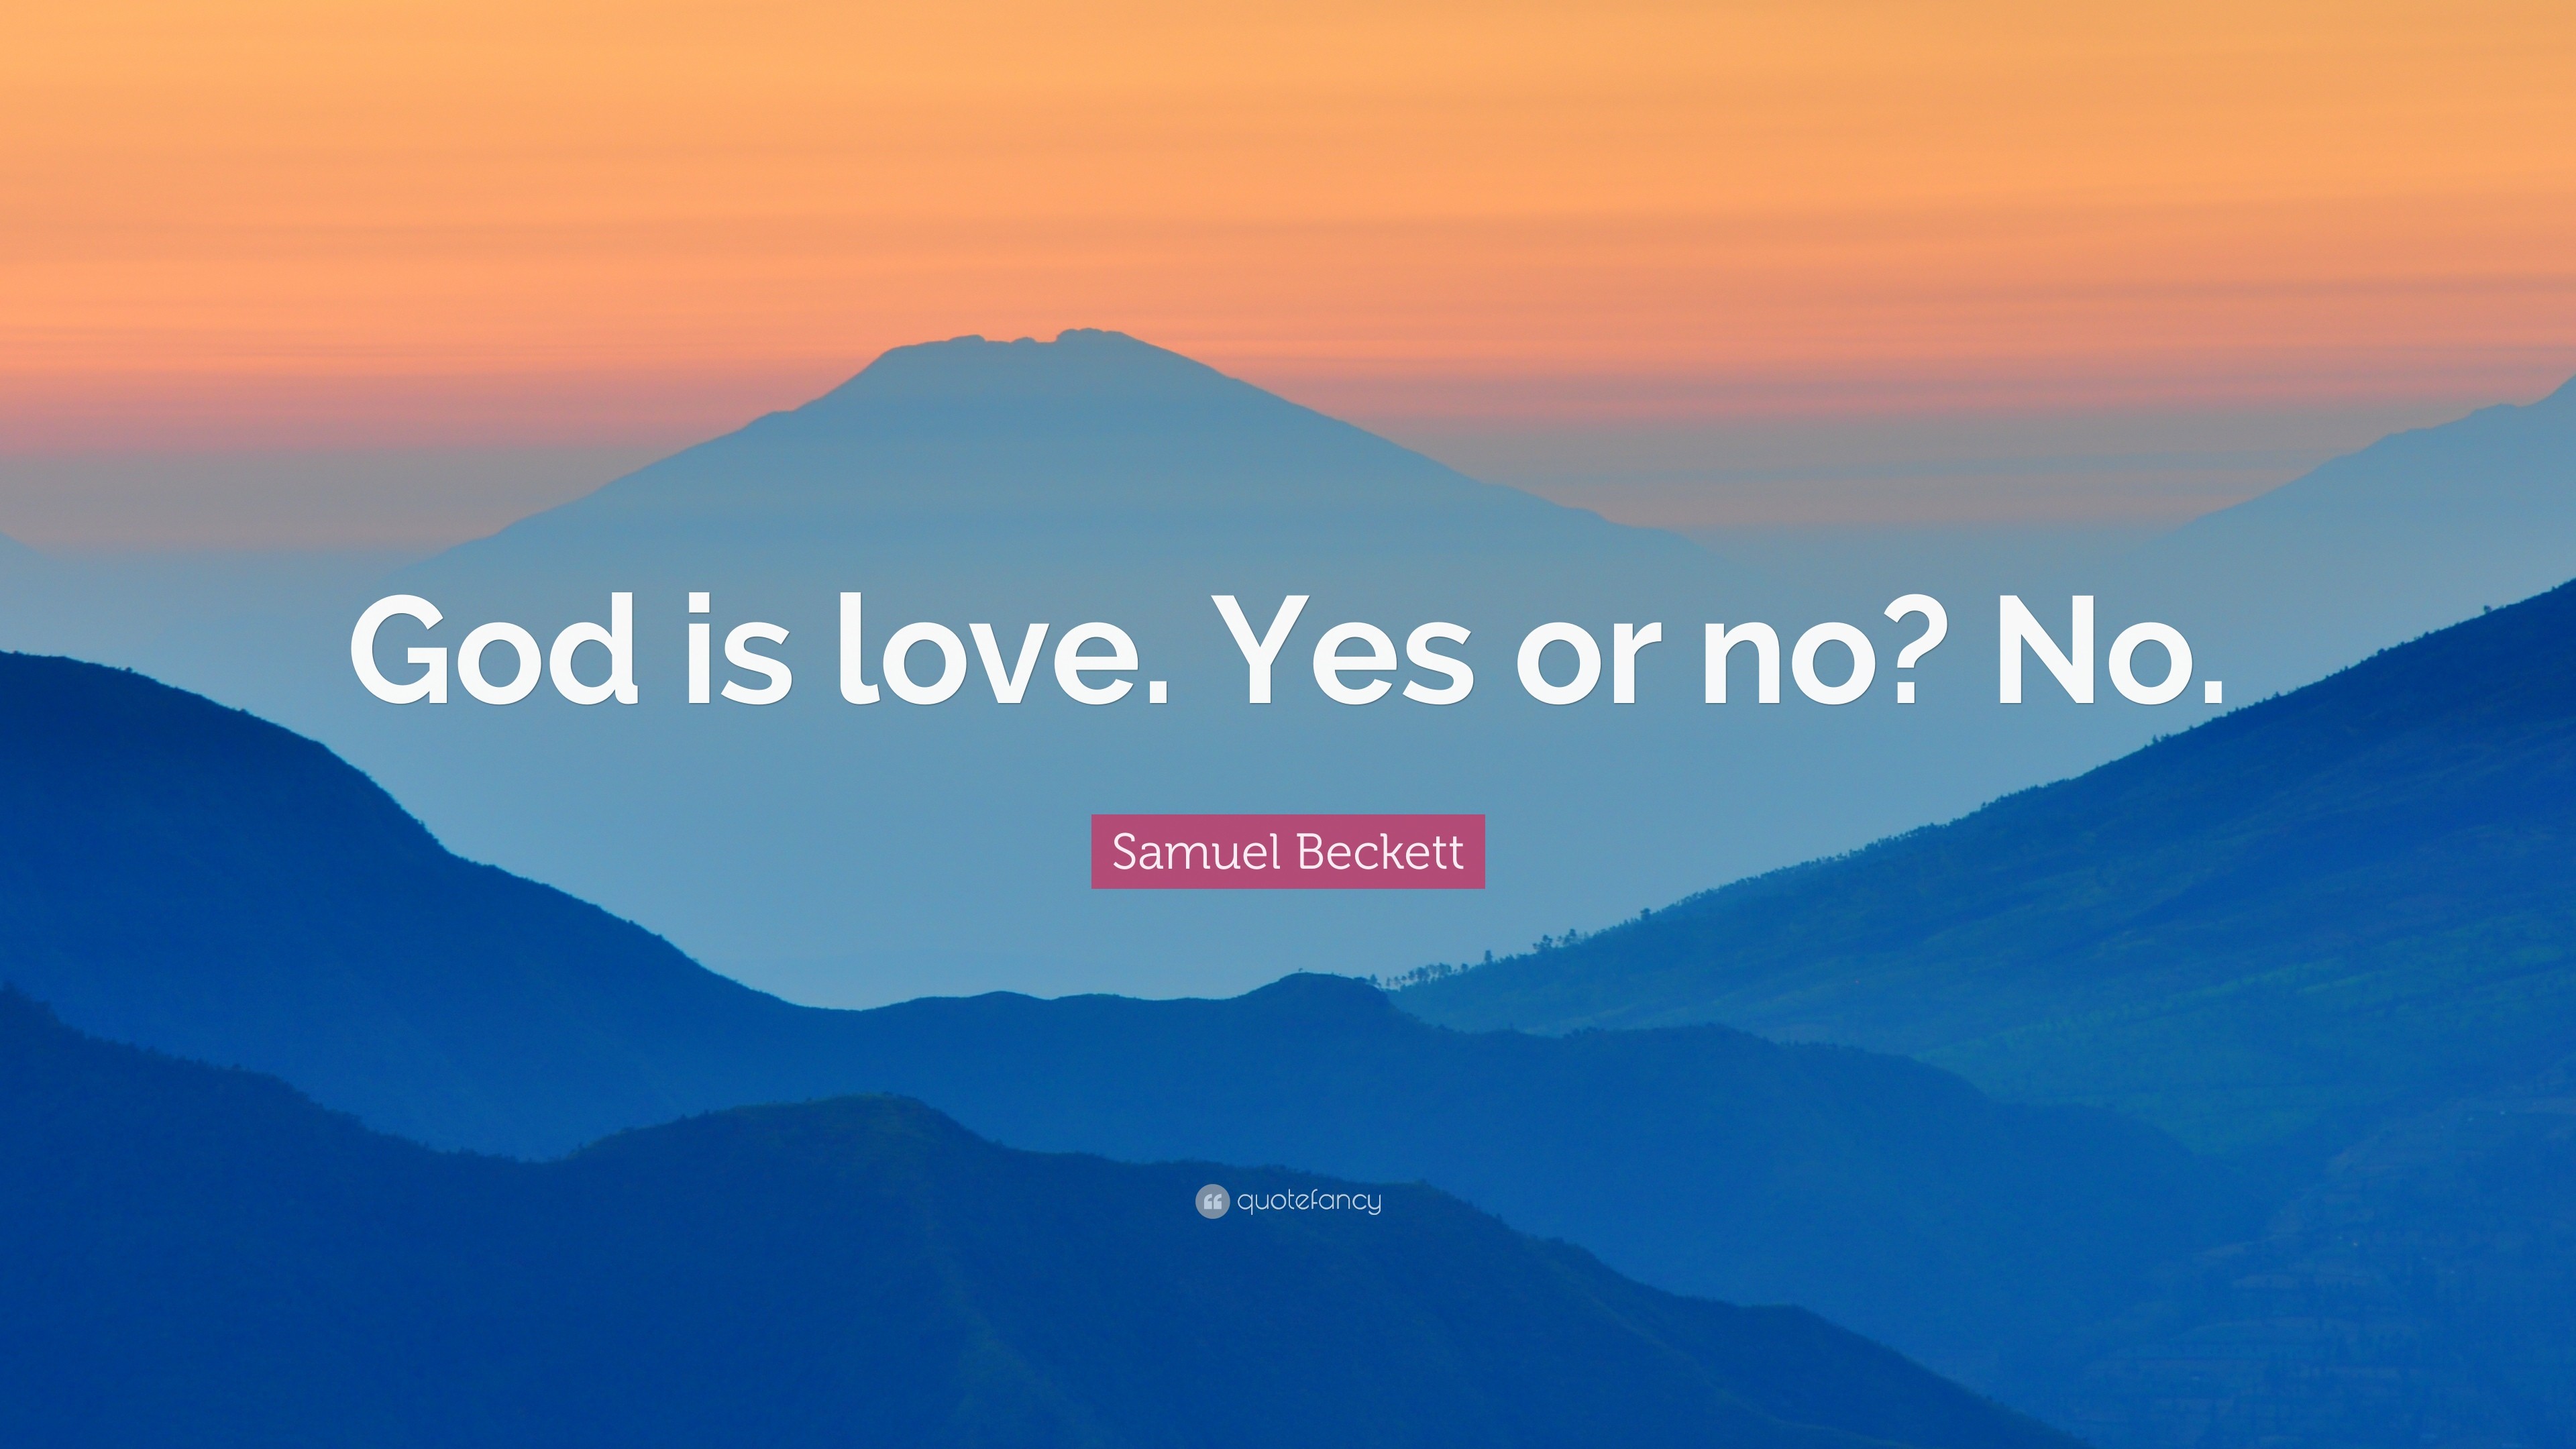 3840x2160 Samuel Beckett Quote: “God is love. Yes or no? No.”